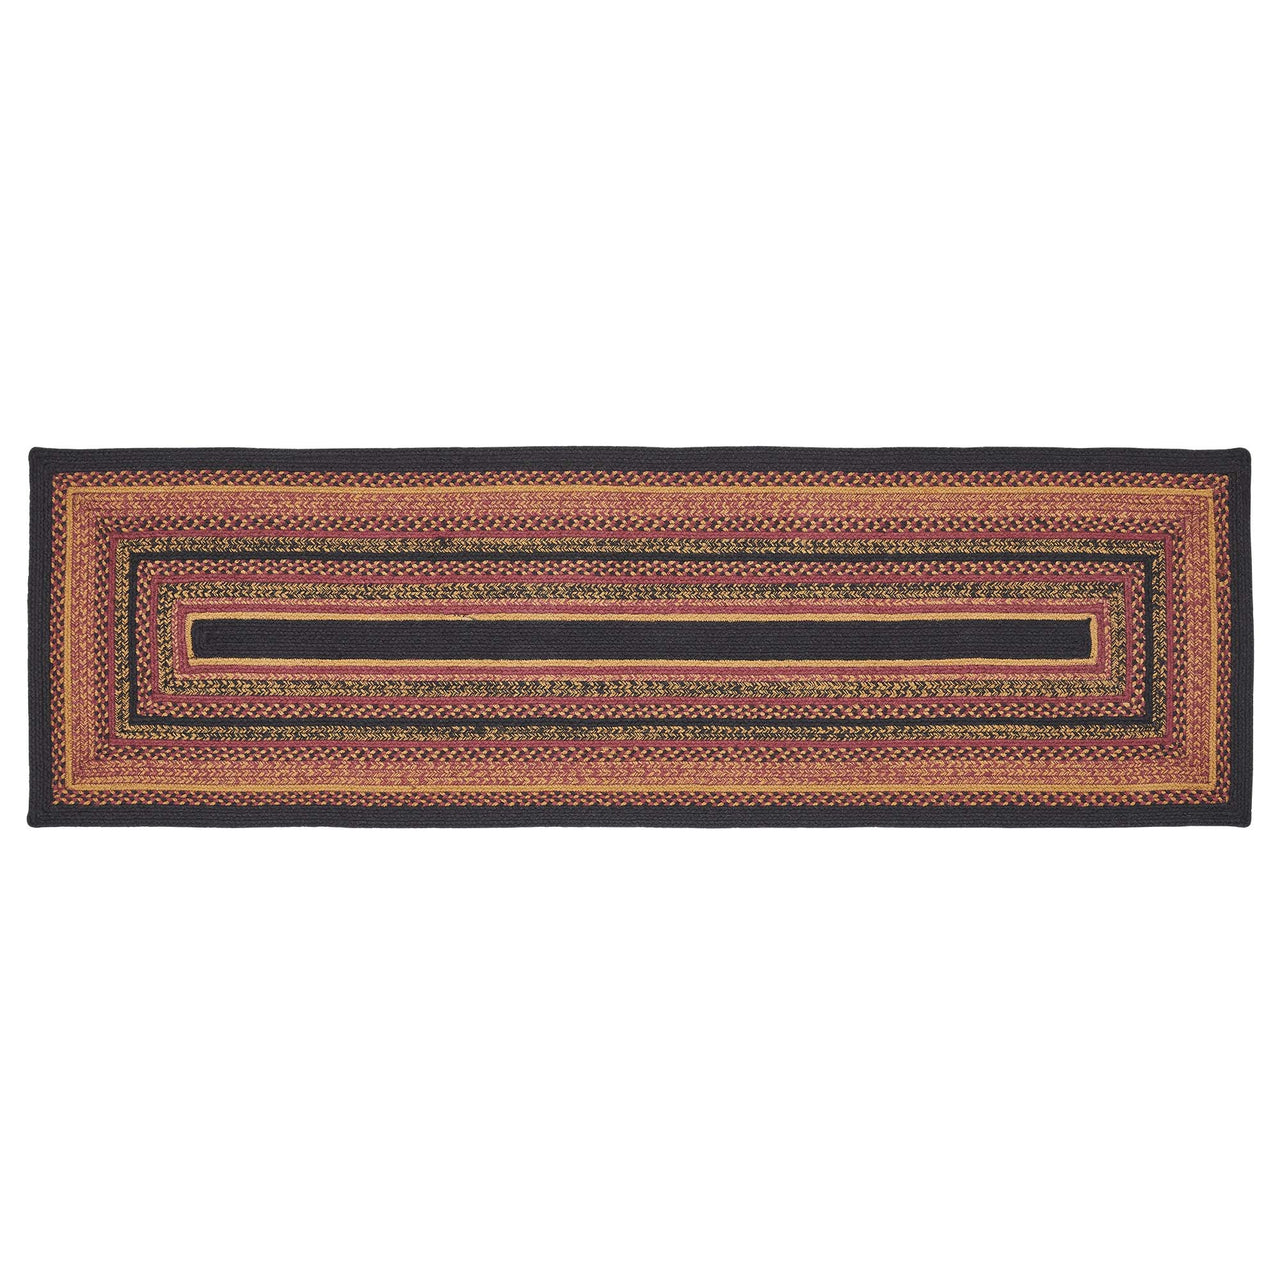 Heritage Farms Jute Braided Rug/Runner Rect. with Rug Pad 2'x6.5' VHC Brands